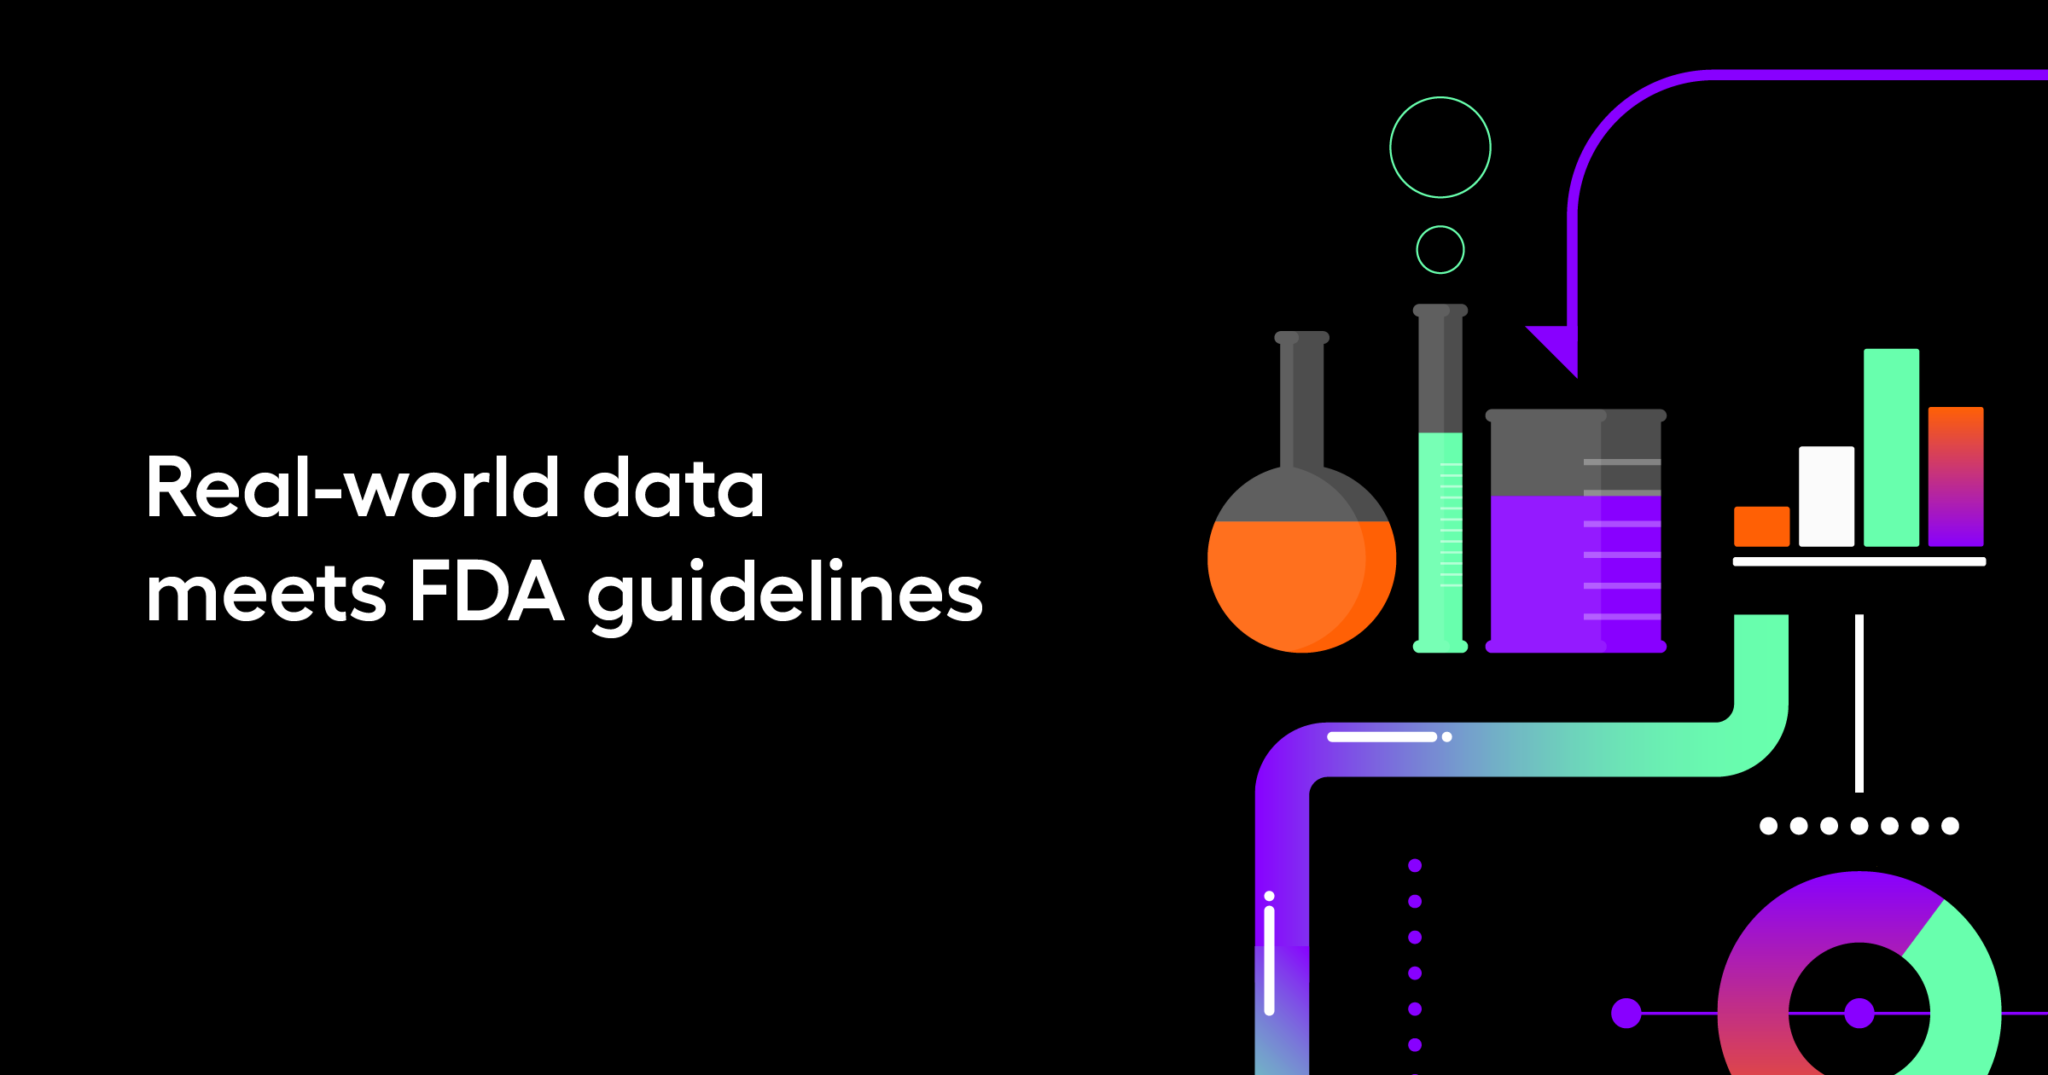 Real-world data meets FDA guidelines